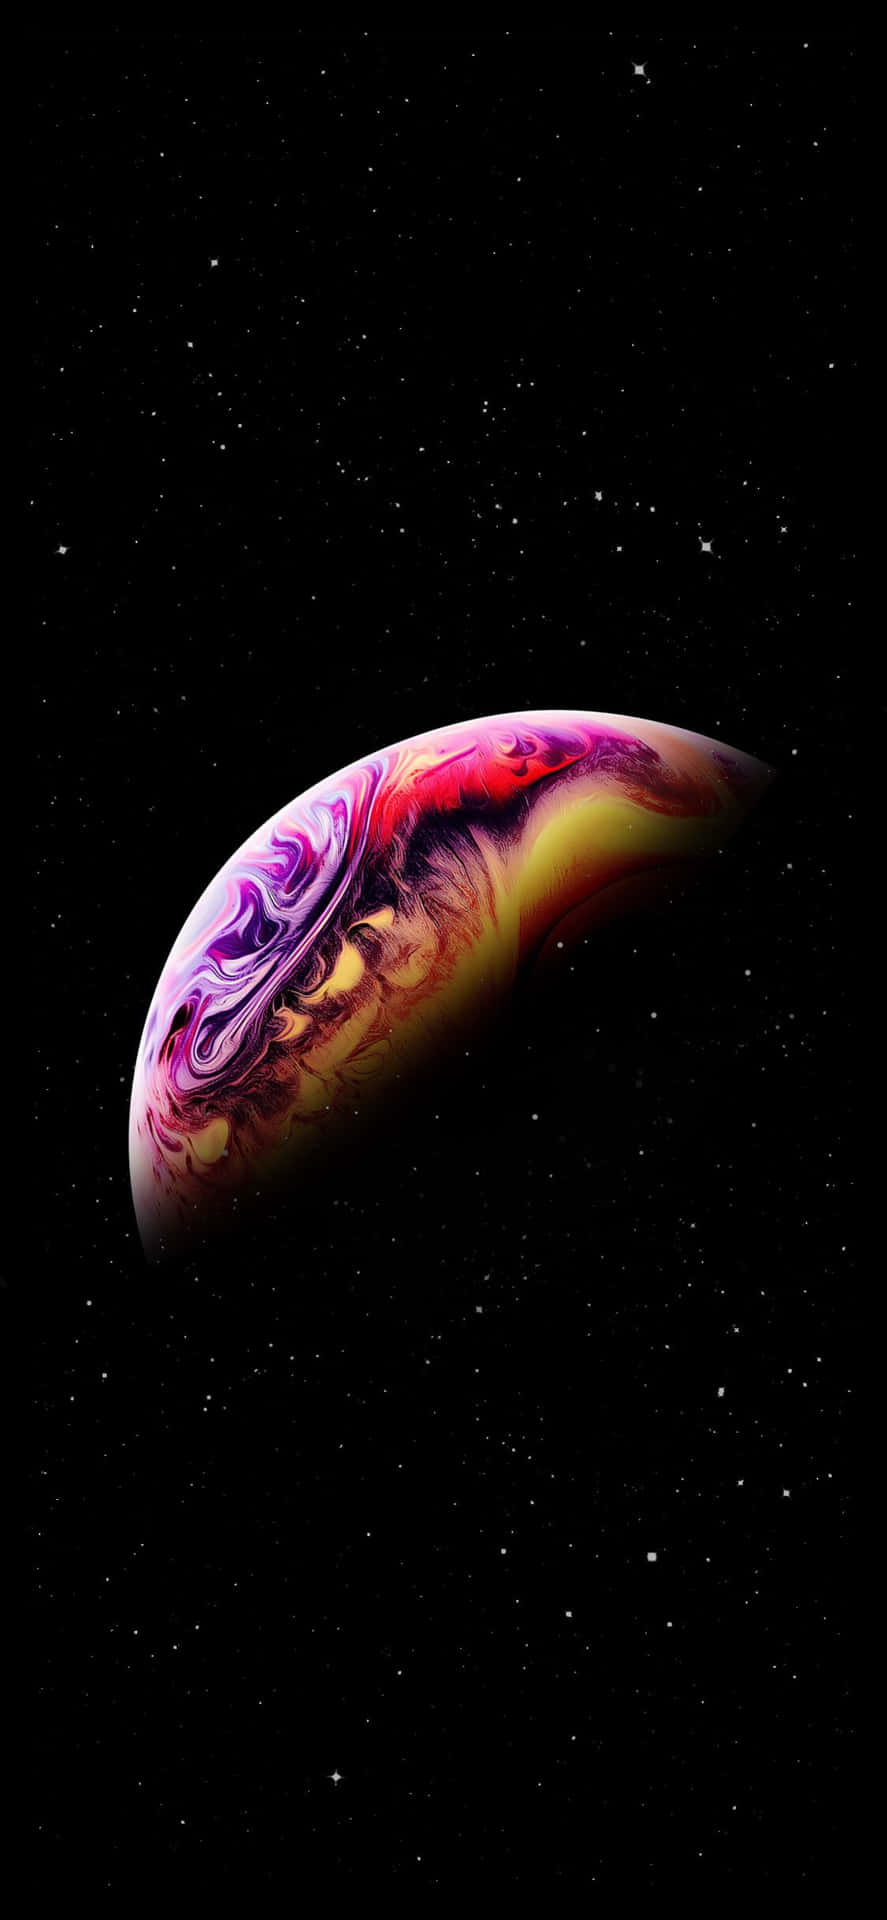 An Iphone Xs Max In Space With A Colorful Background Wallpaper